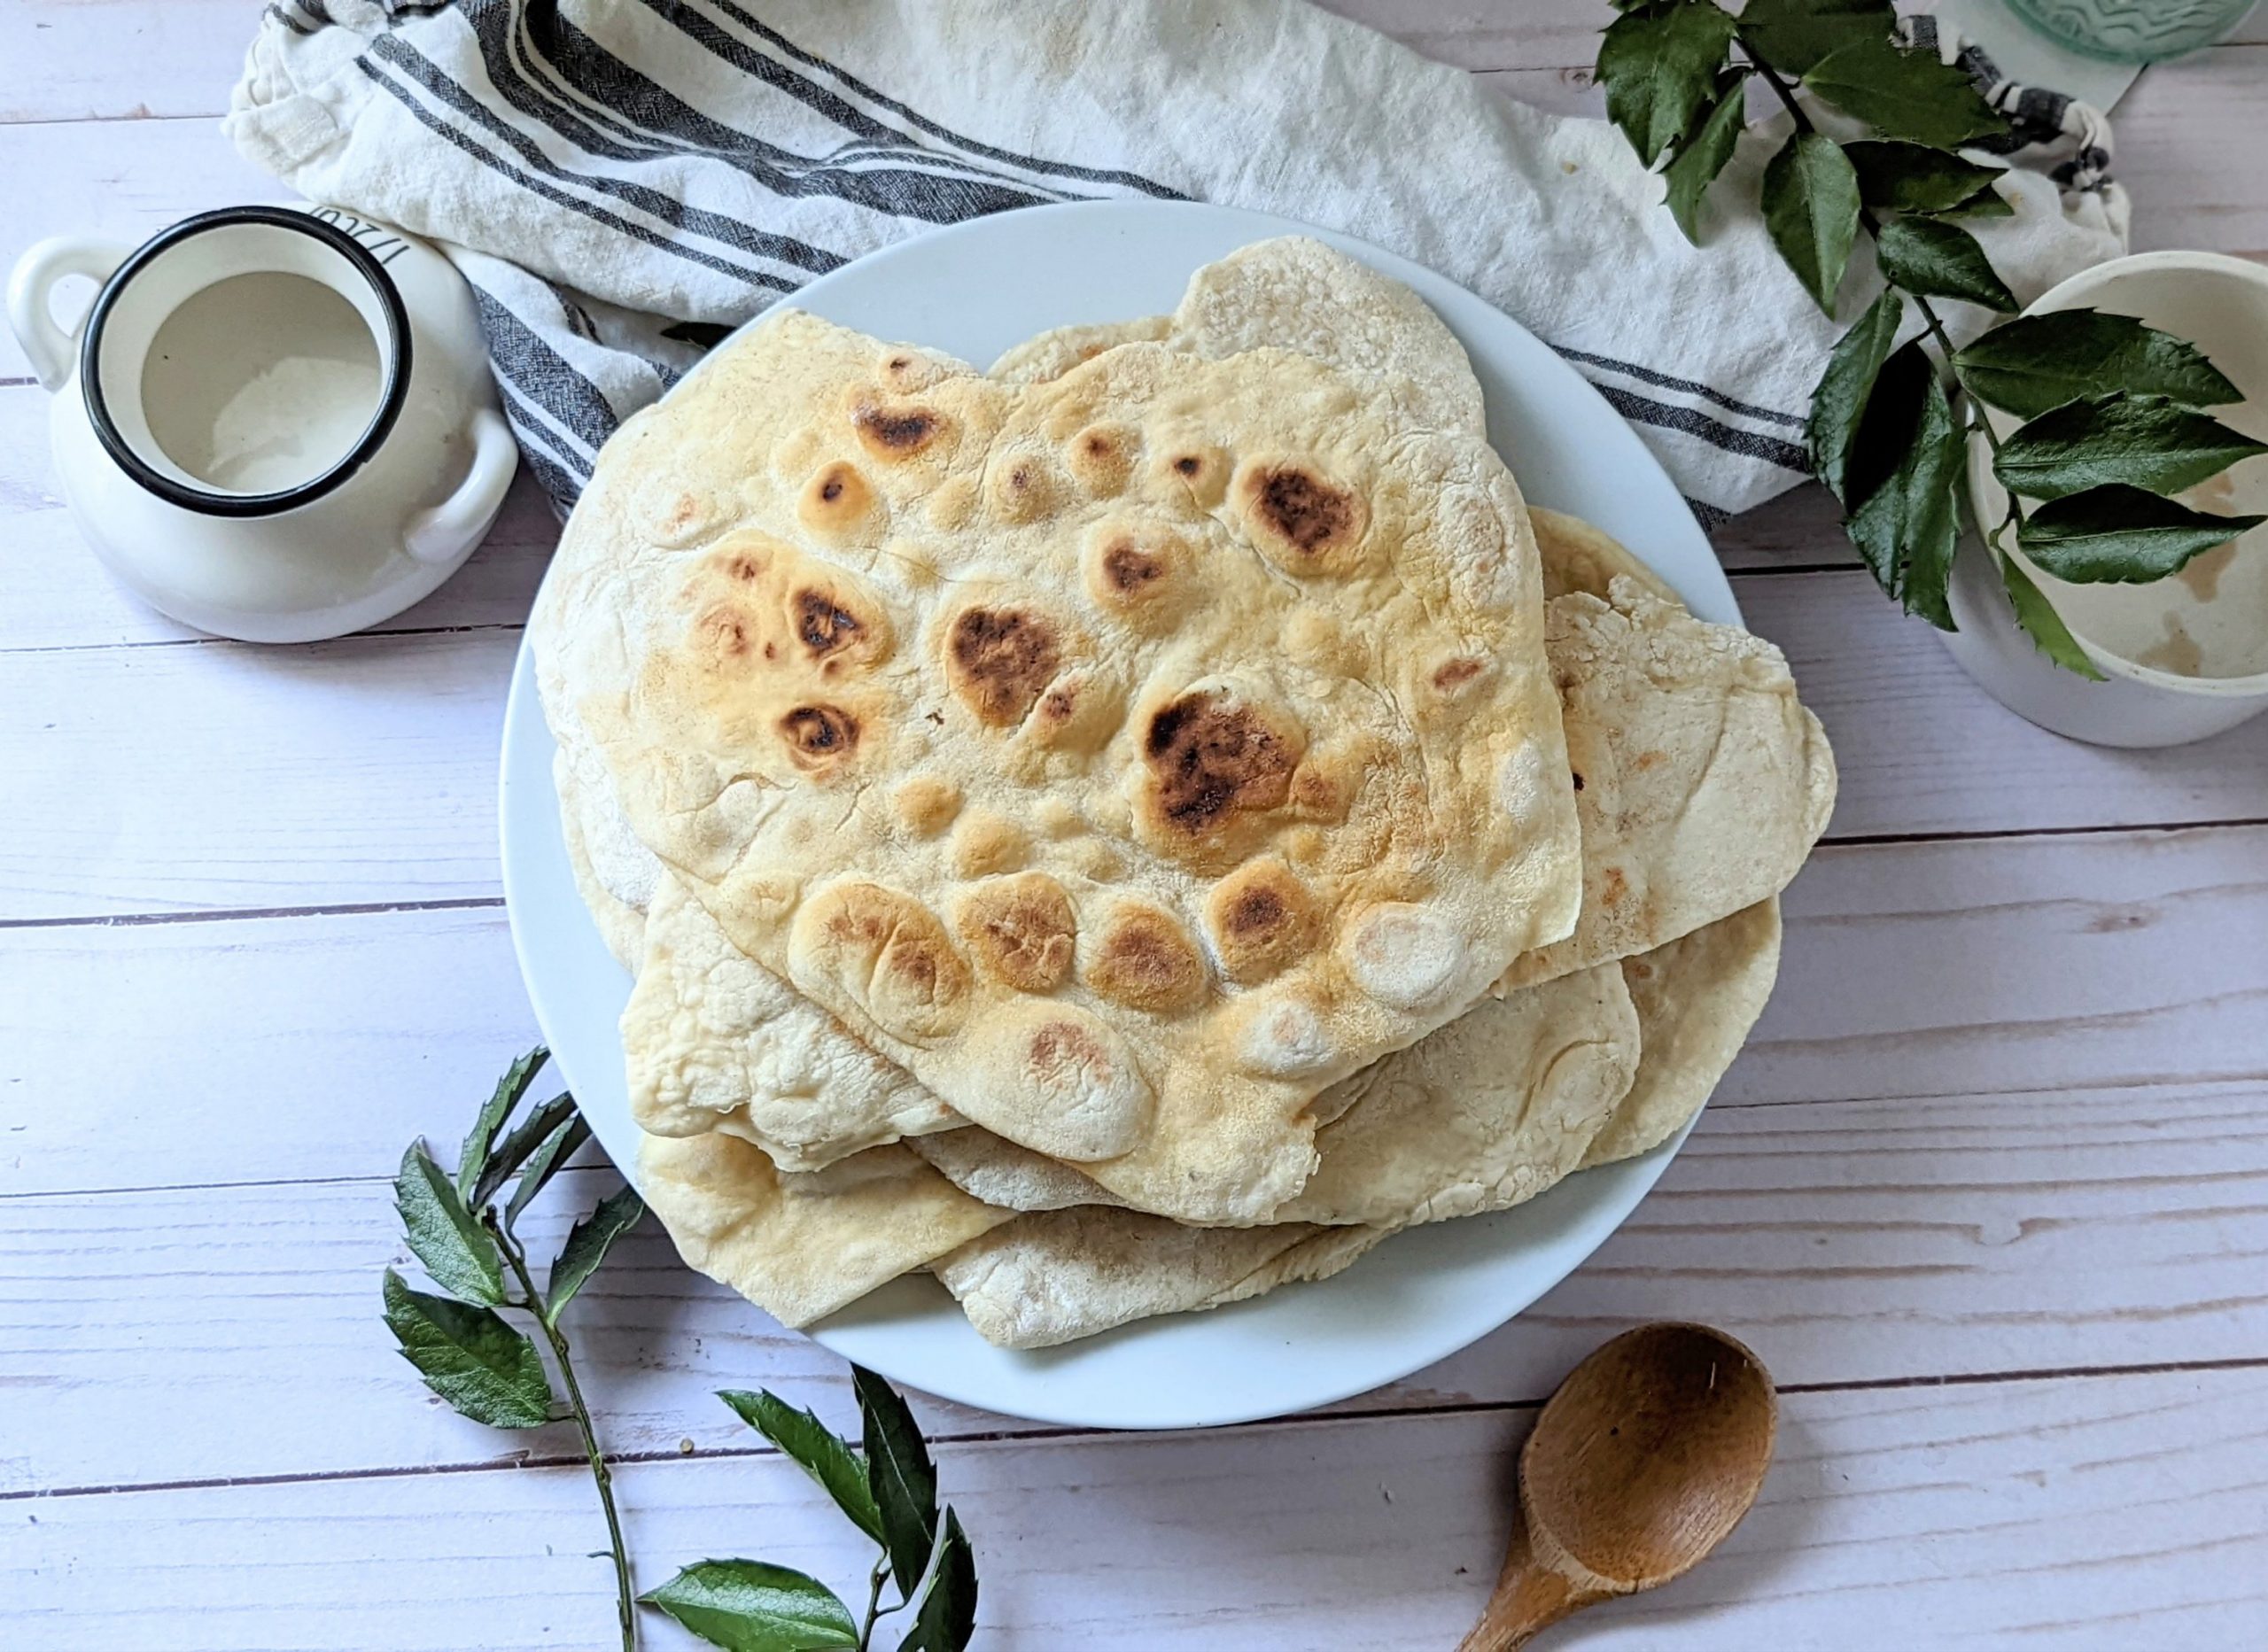 naan with yeast recipe how to make naan with yeast recipe vegetarian vegan egg free dairy free naan bread